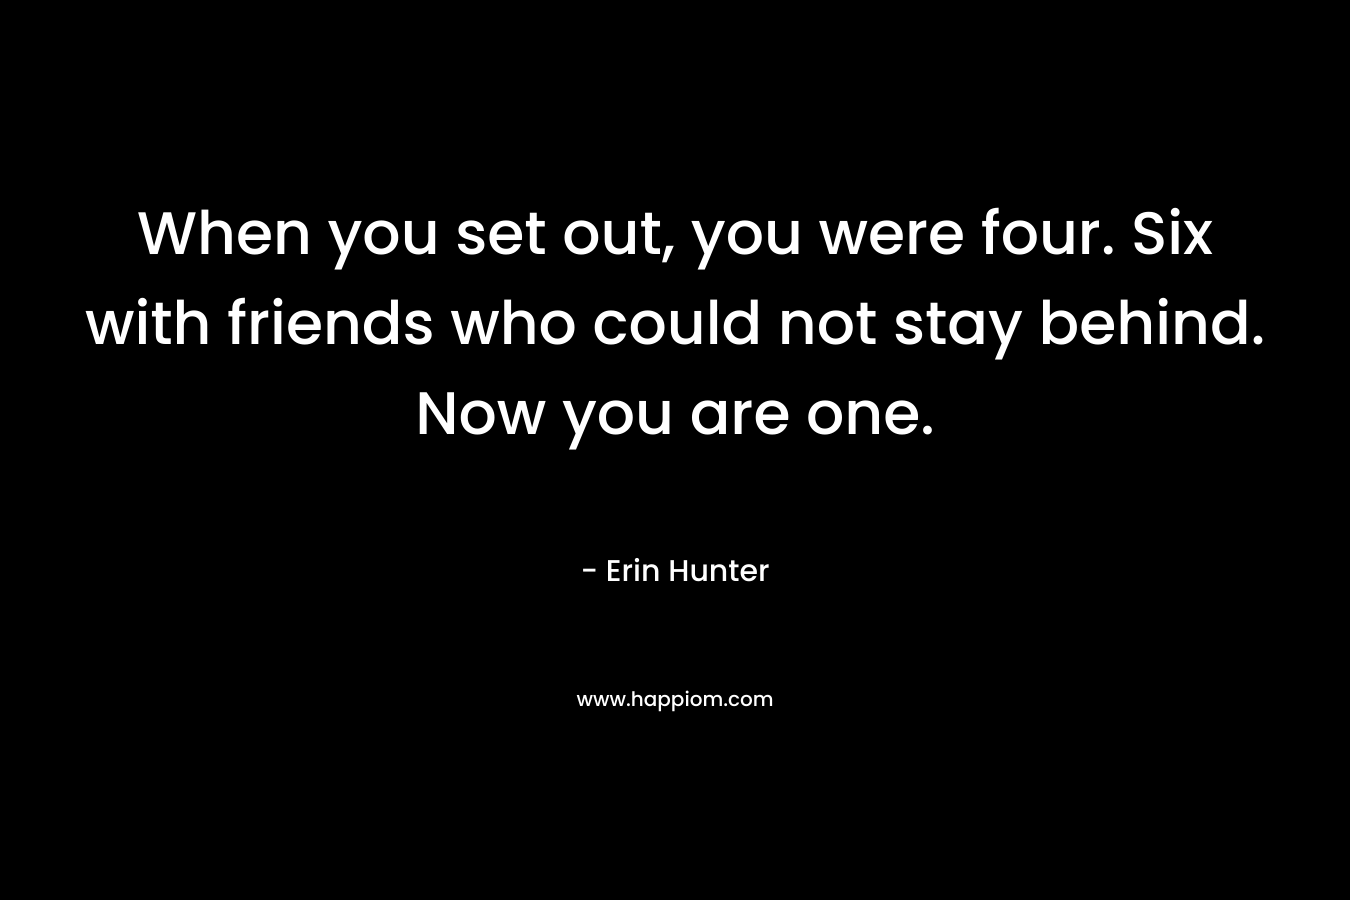 When you set out, you were four. Six with friends who could not stay behind. Now you are one.